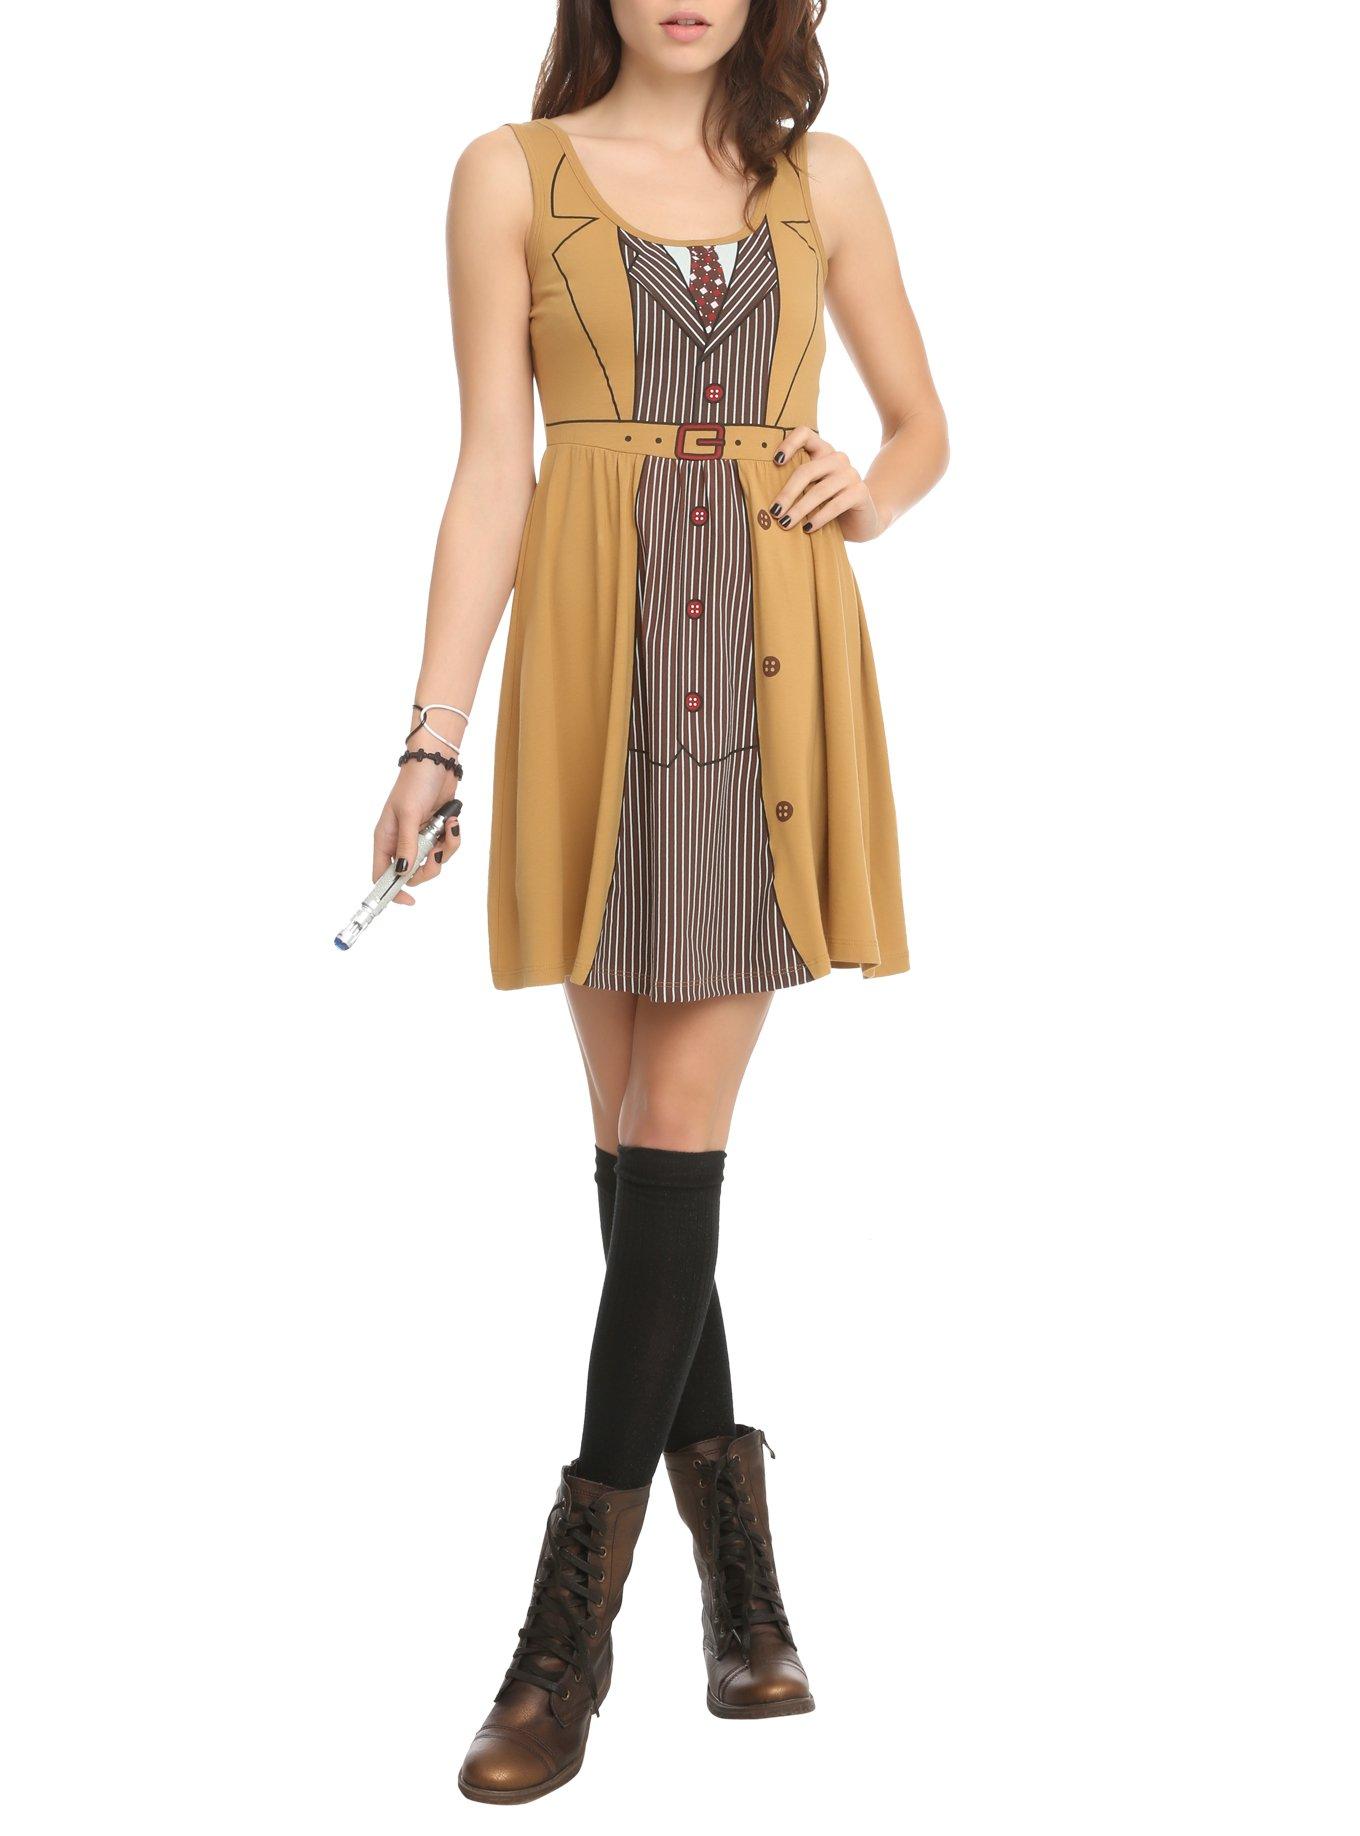 sexy doctor who costumes